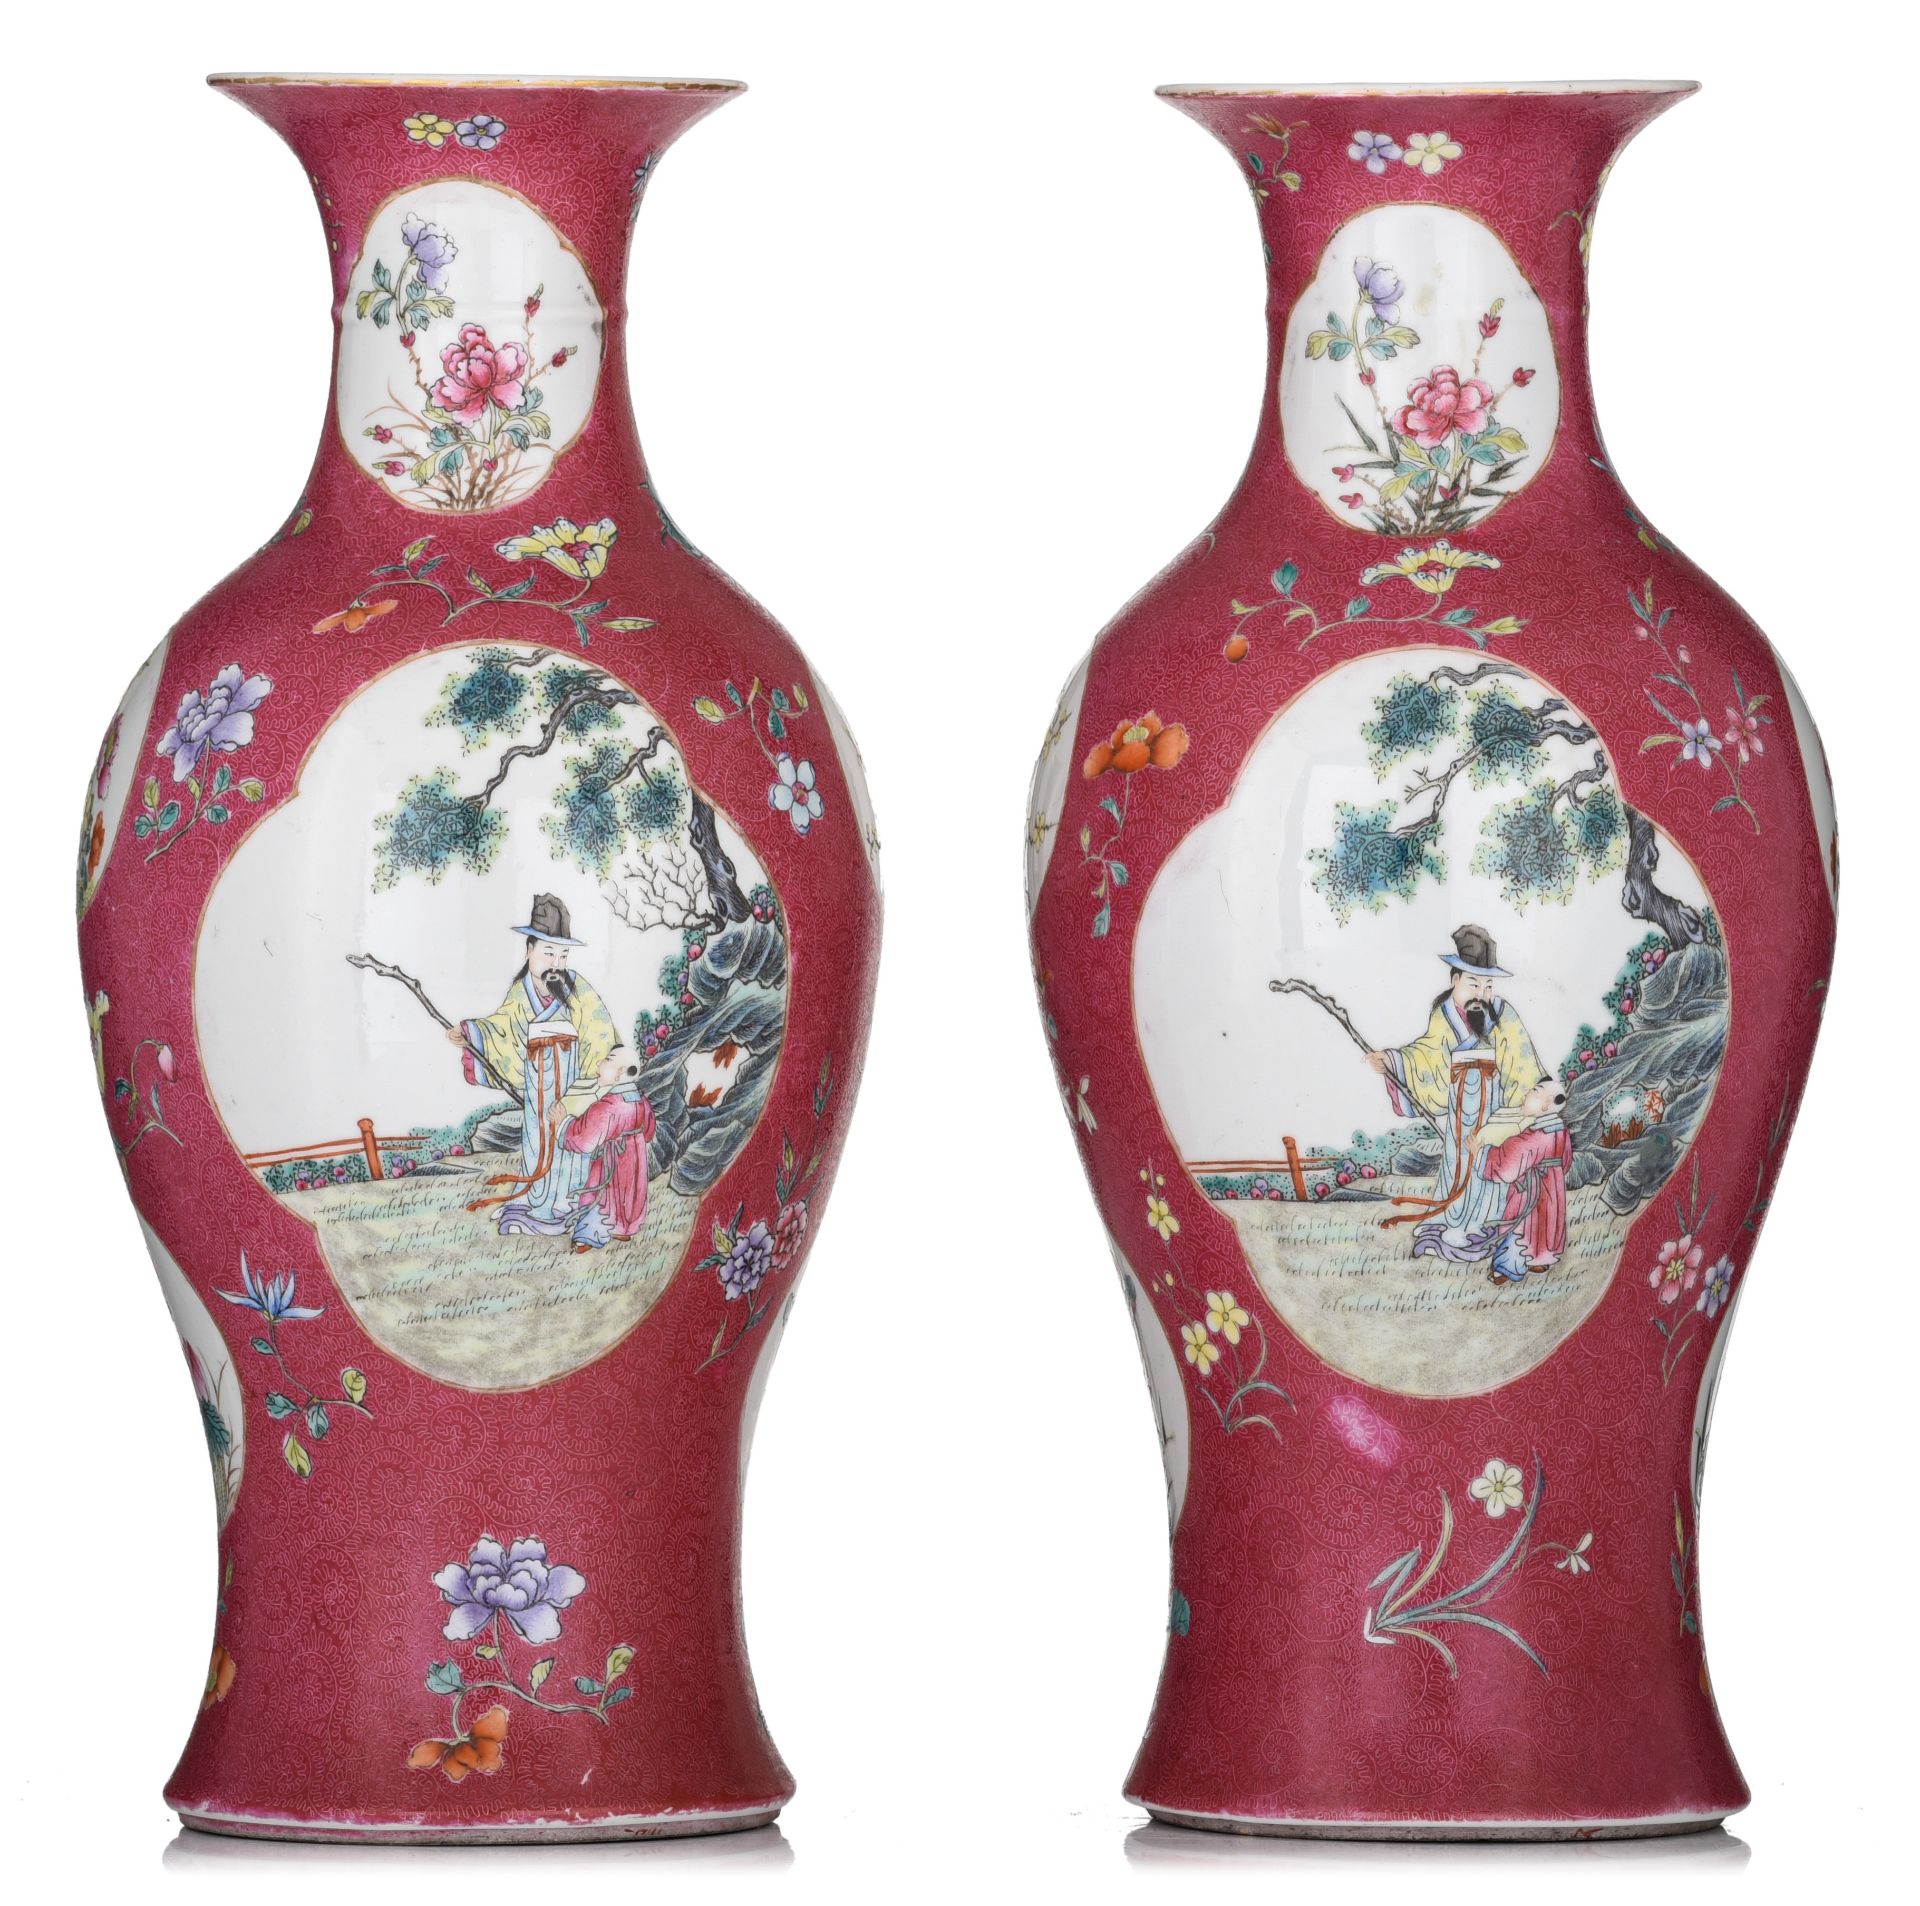 Two Chinese Republic period ruby ground sgraffito baluster vases, with a Qianlong mark, 20thC, H 44,